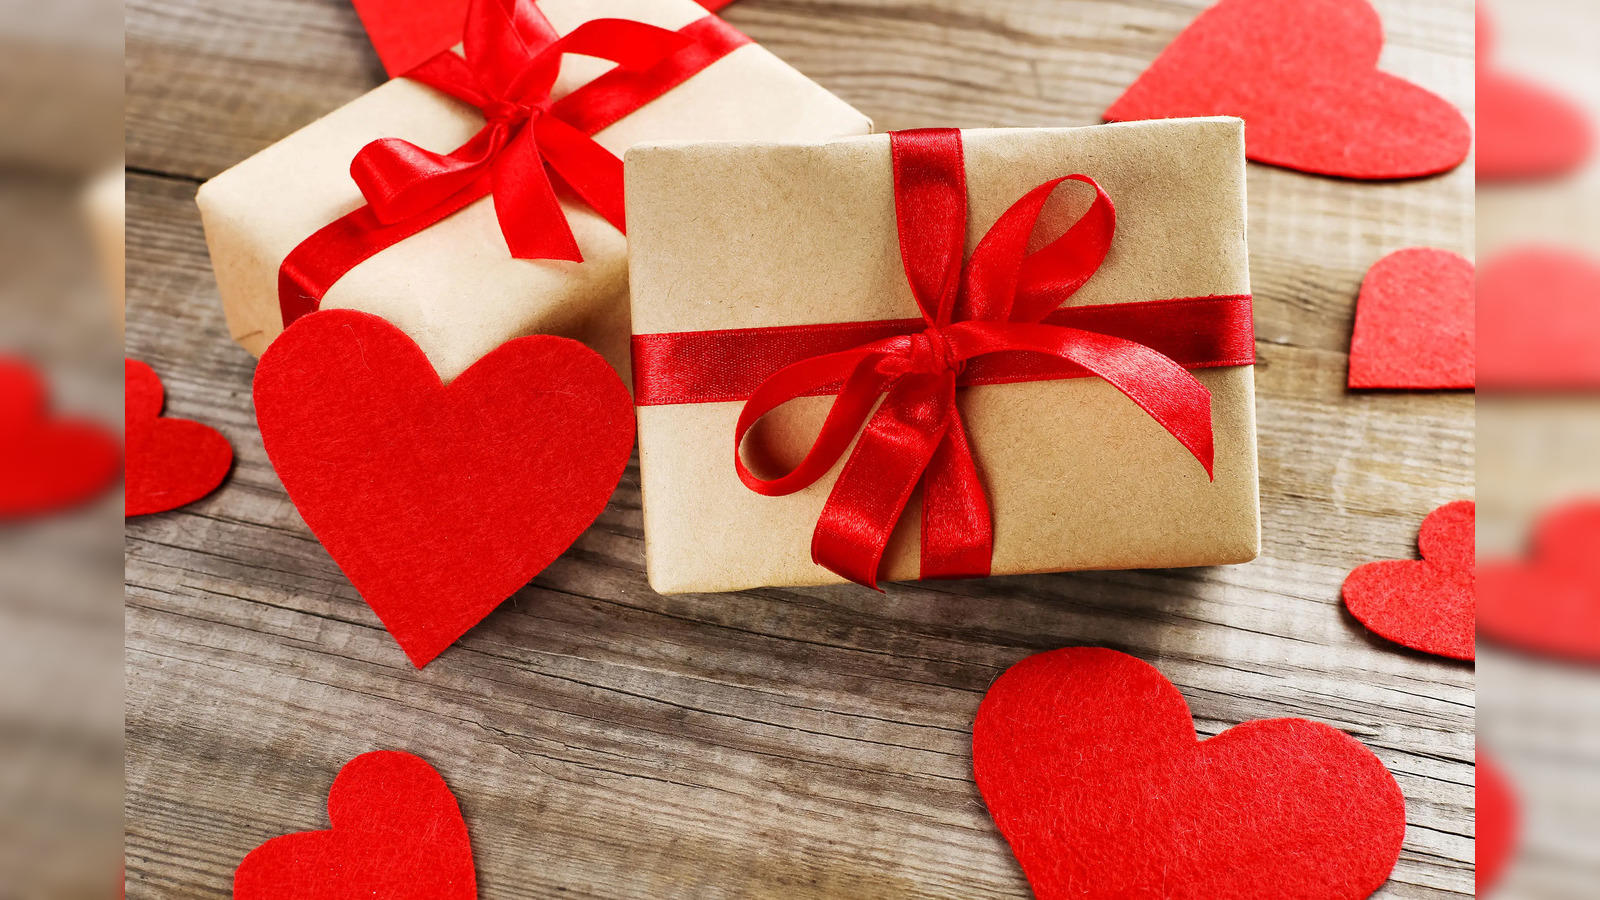 Valentine's day gifts - 10 unique Valentine's day gifts for your